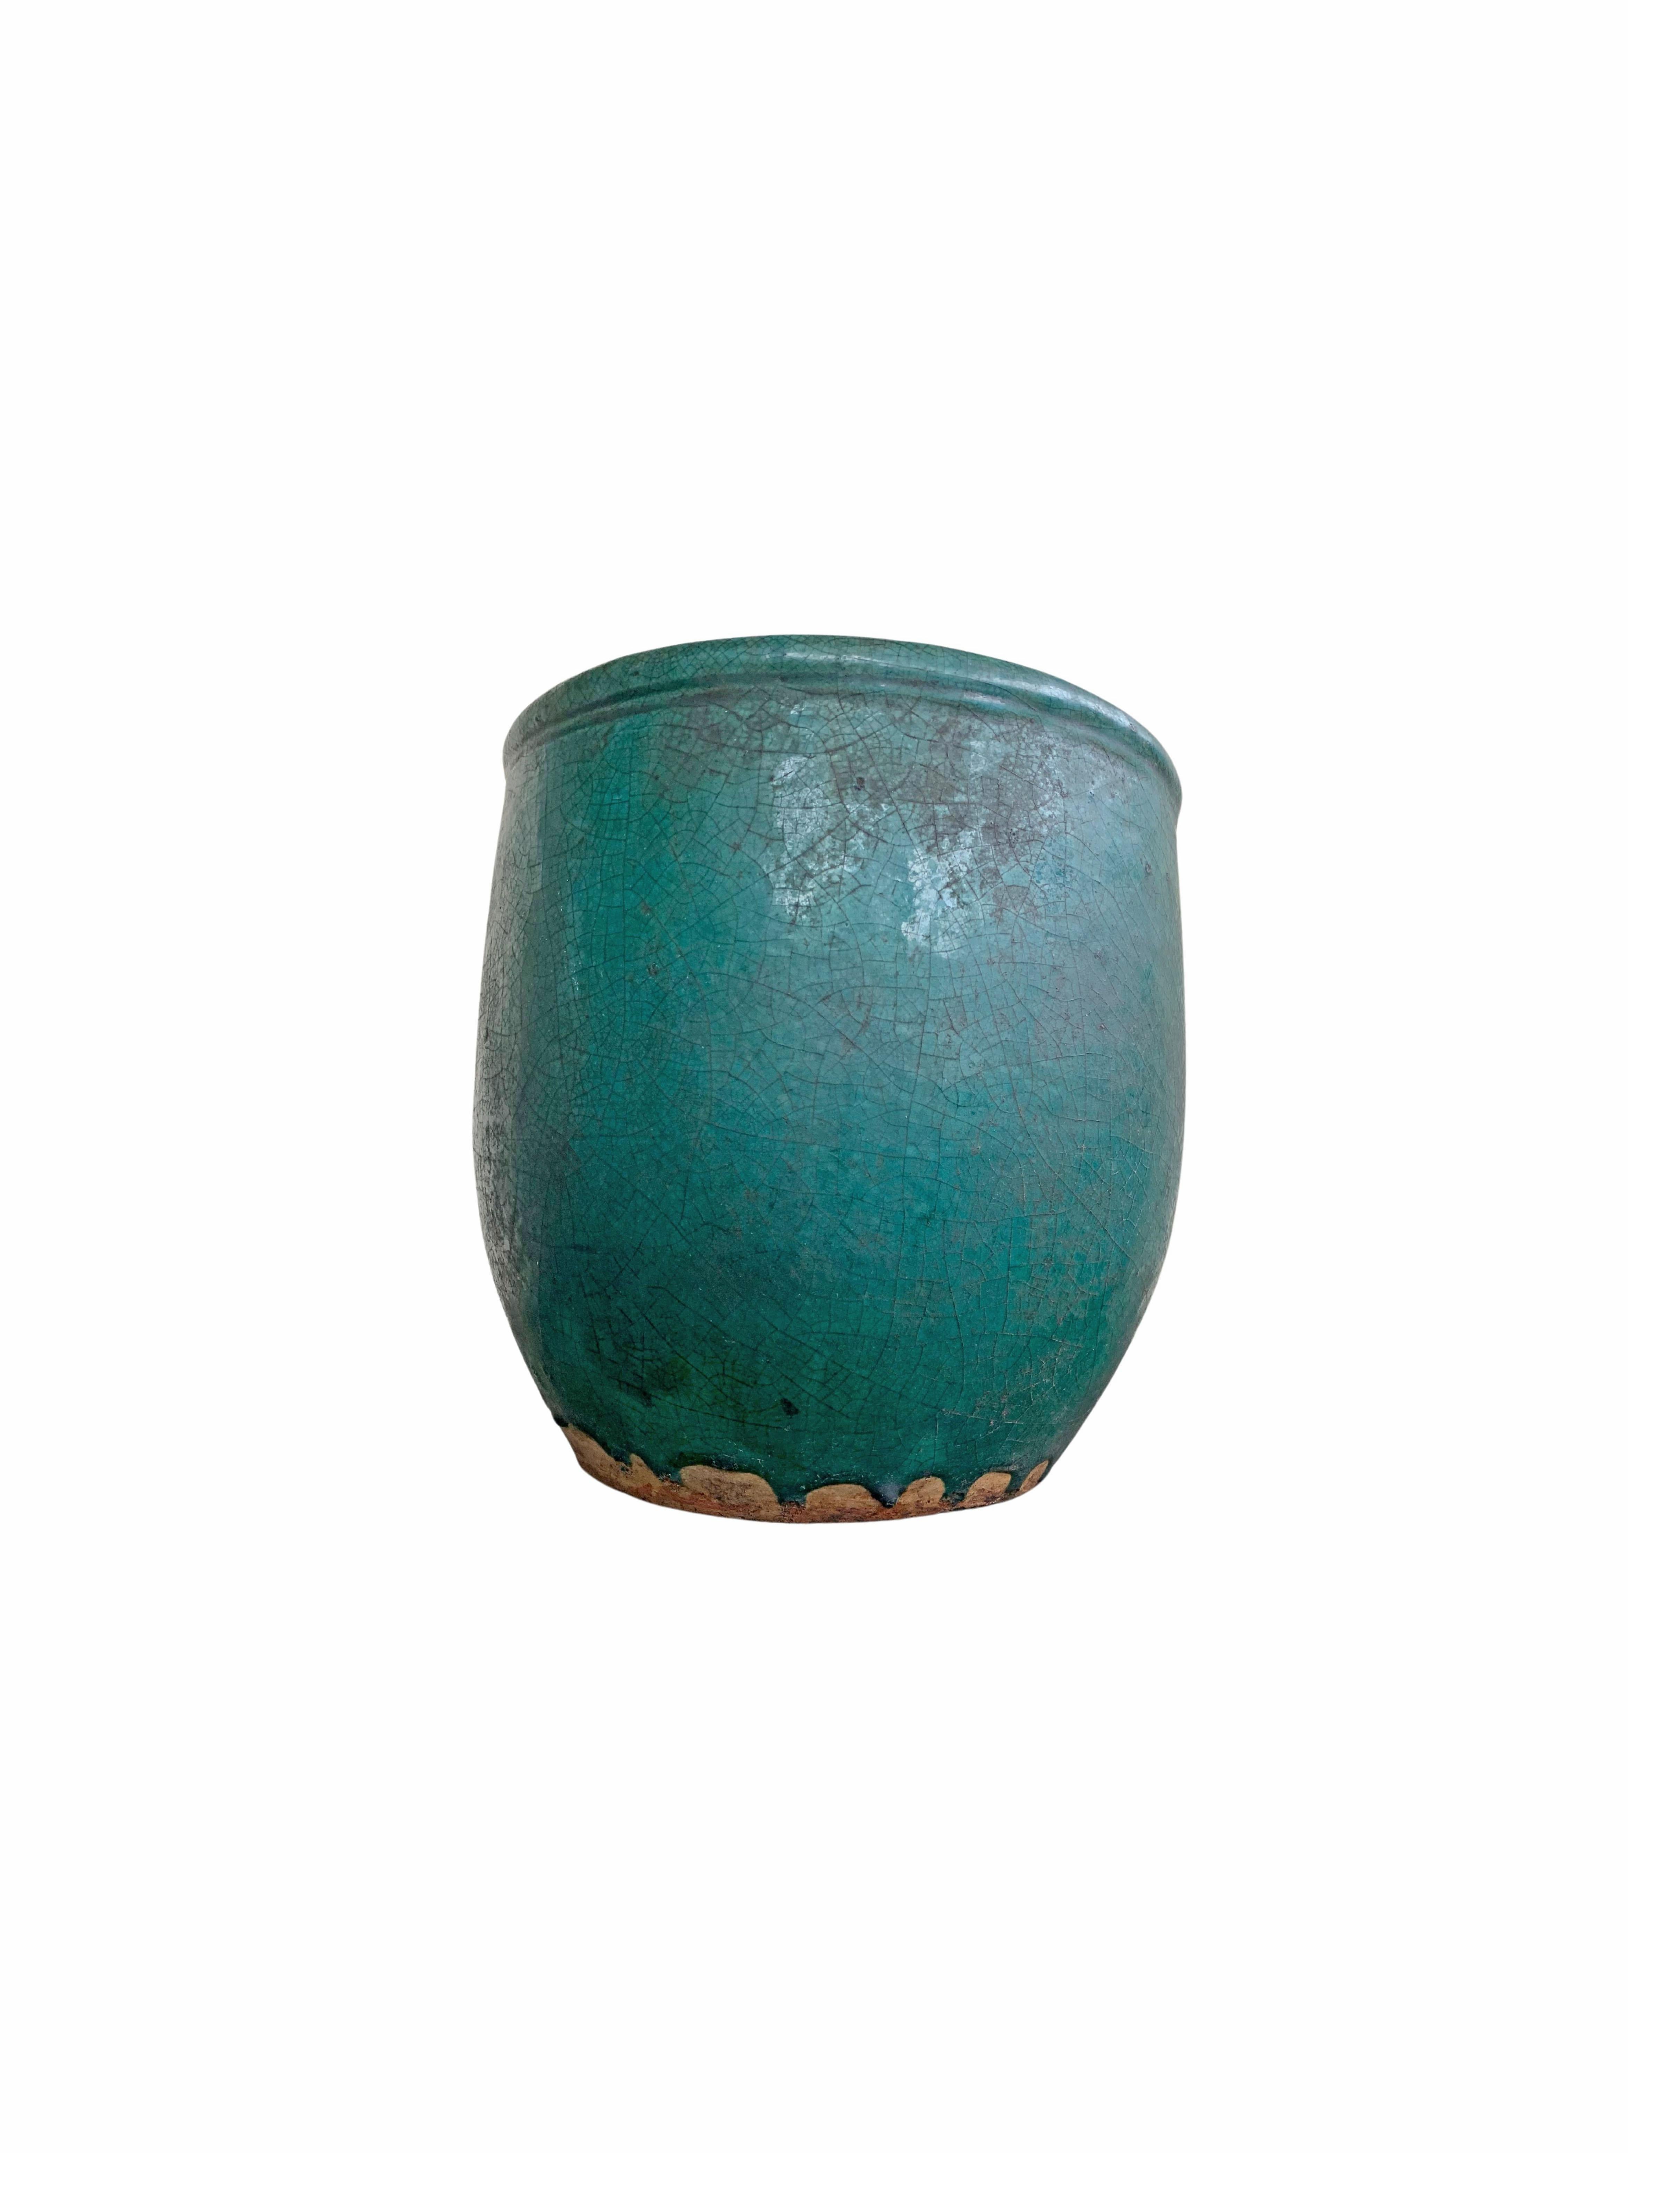 Chinese Green Glazed Jar / Planter, c. 1900 In Good Condition For Sale In Jimbaran, Bali